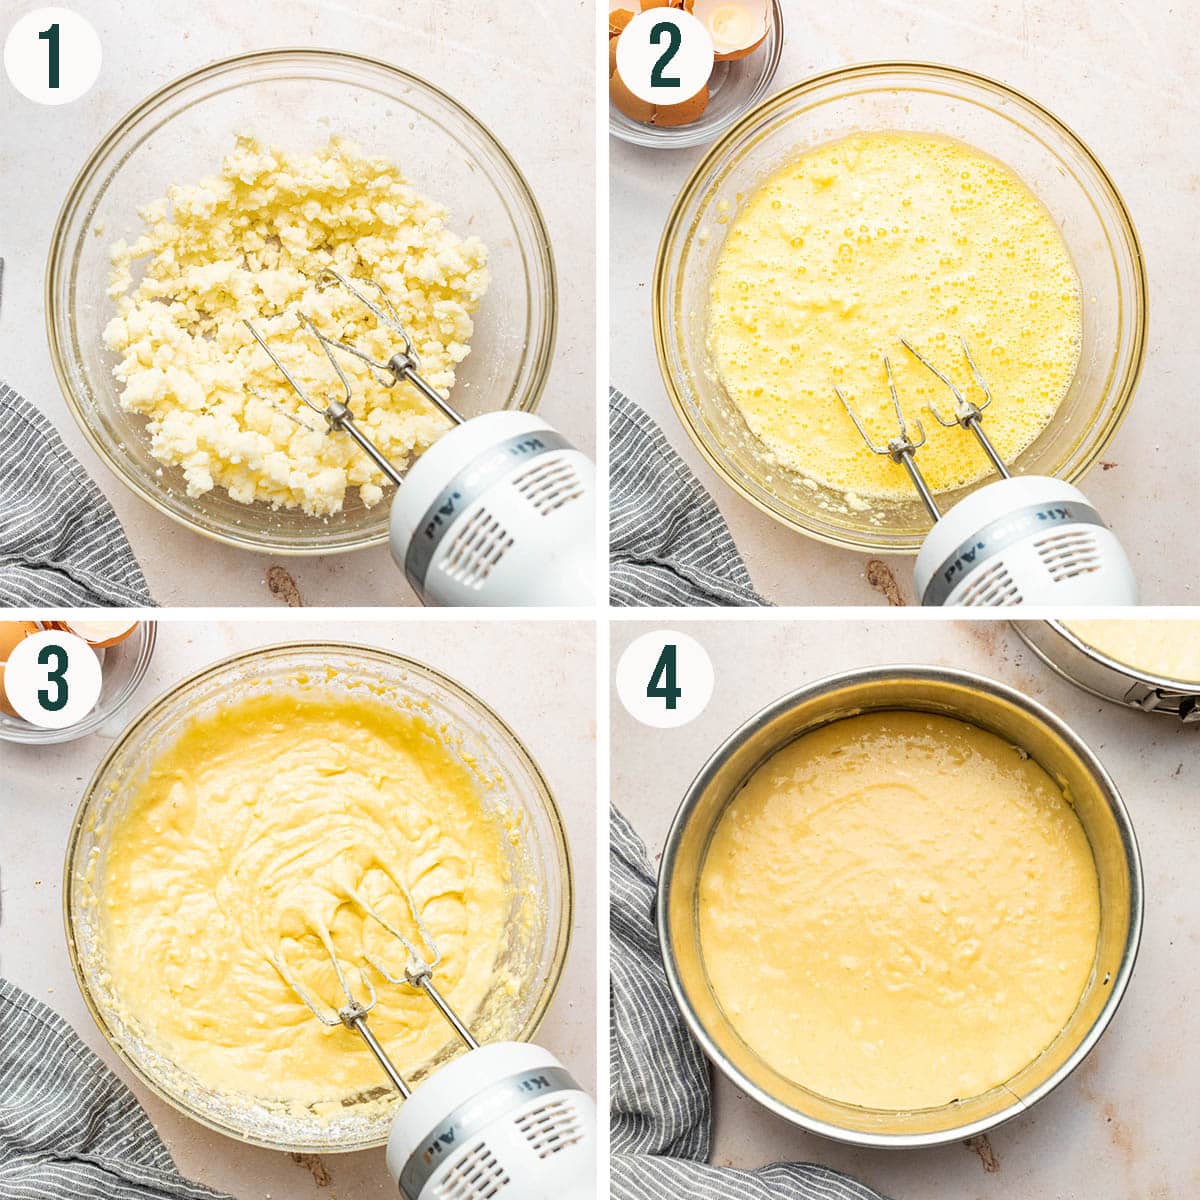 Sponge cake steps 1 to 4, mixing the batter and transferring to a tin.